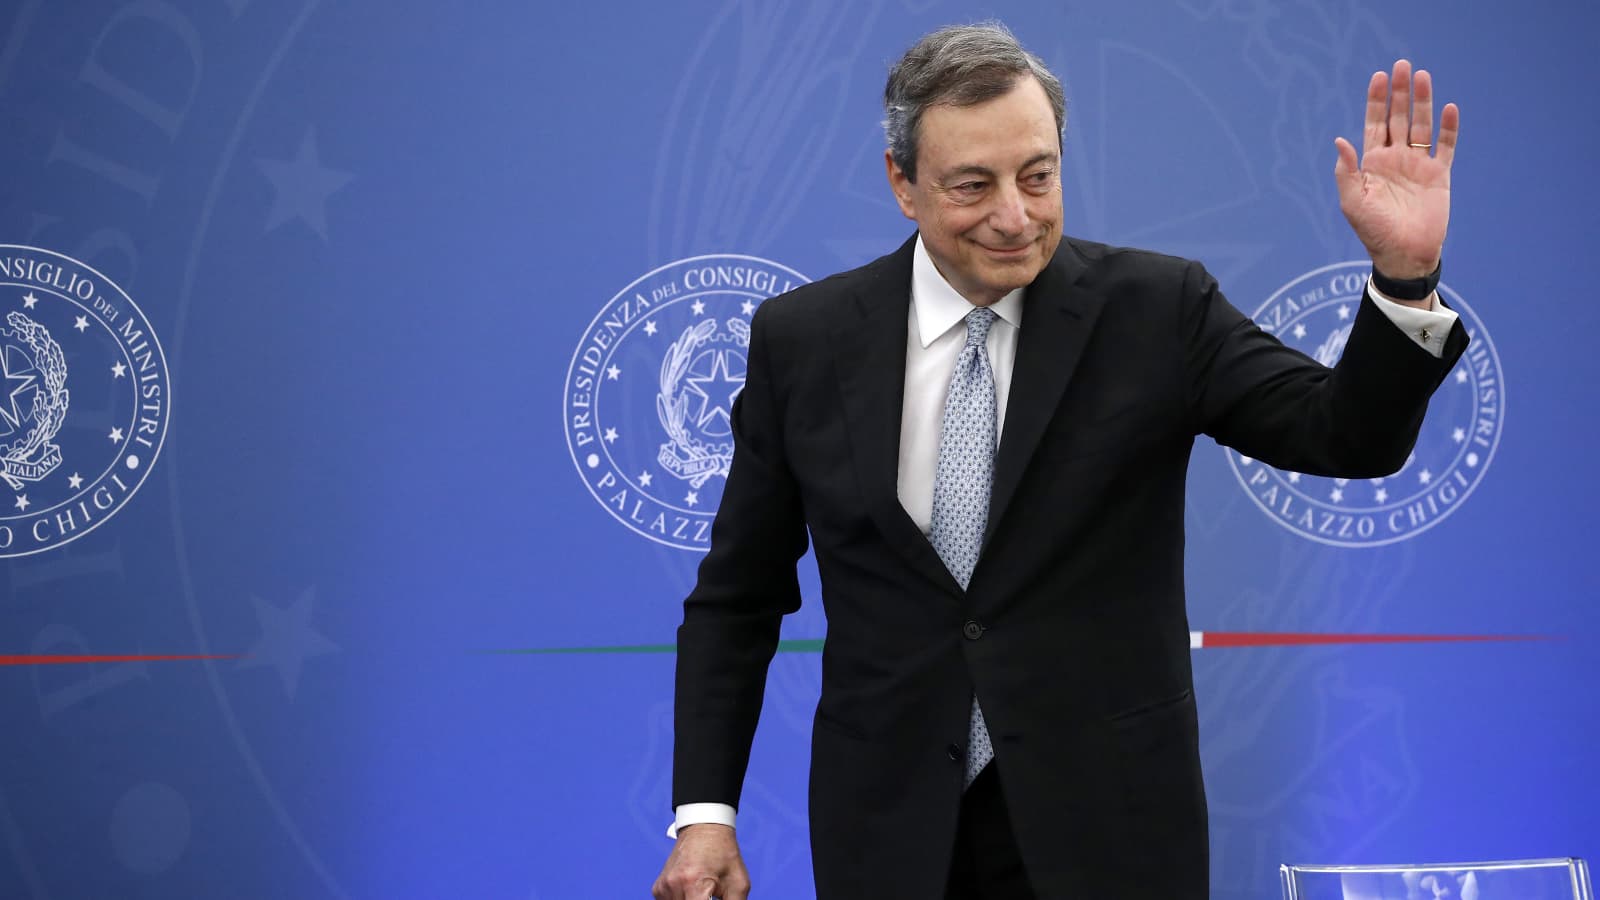 Italian PM Mario Draghi tenders resignation after failing to revive government